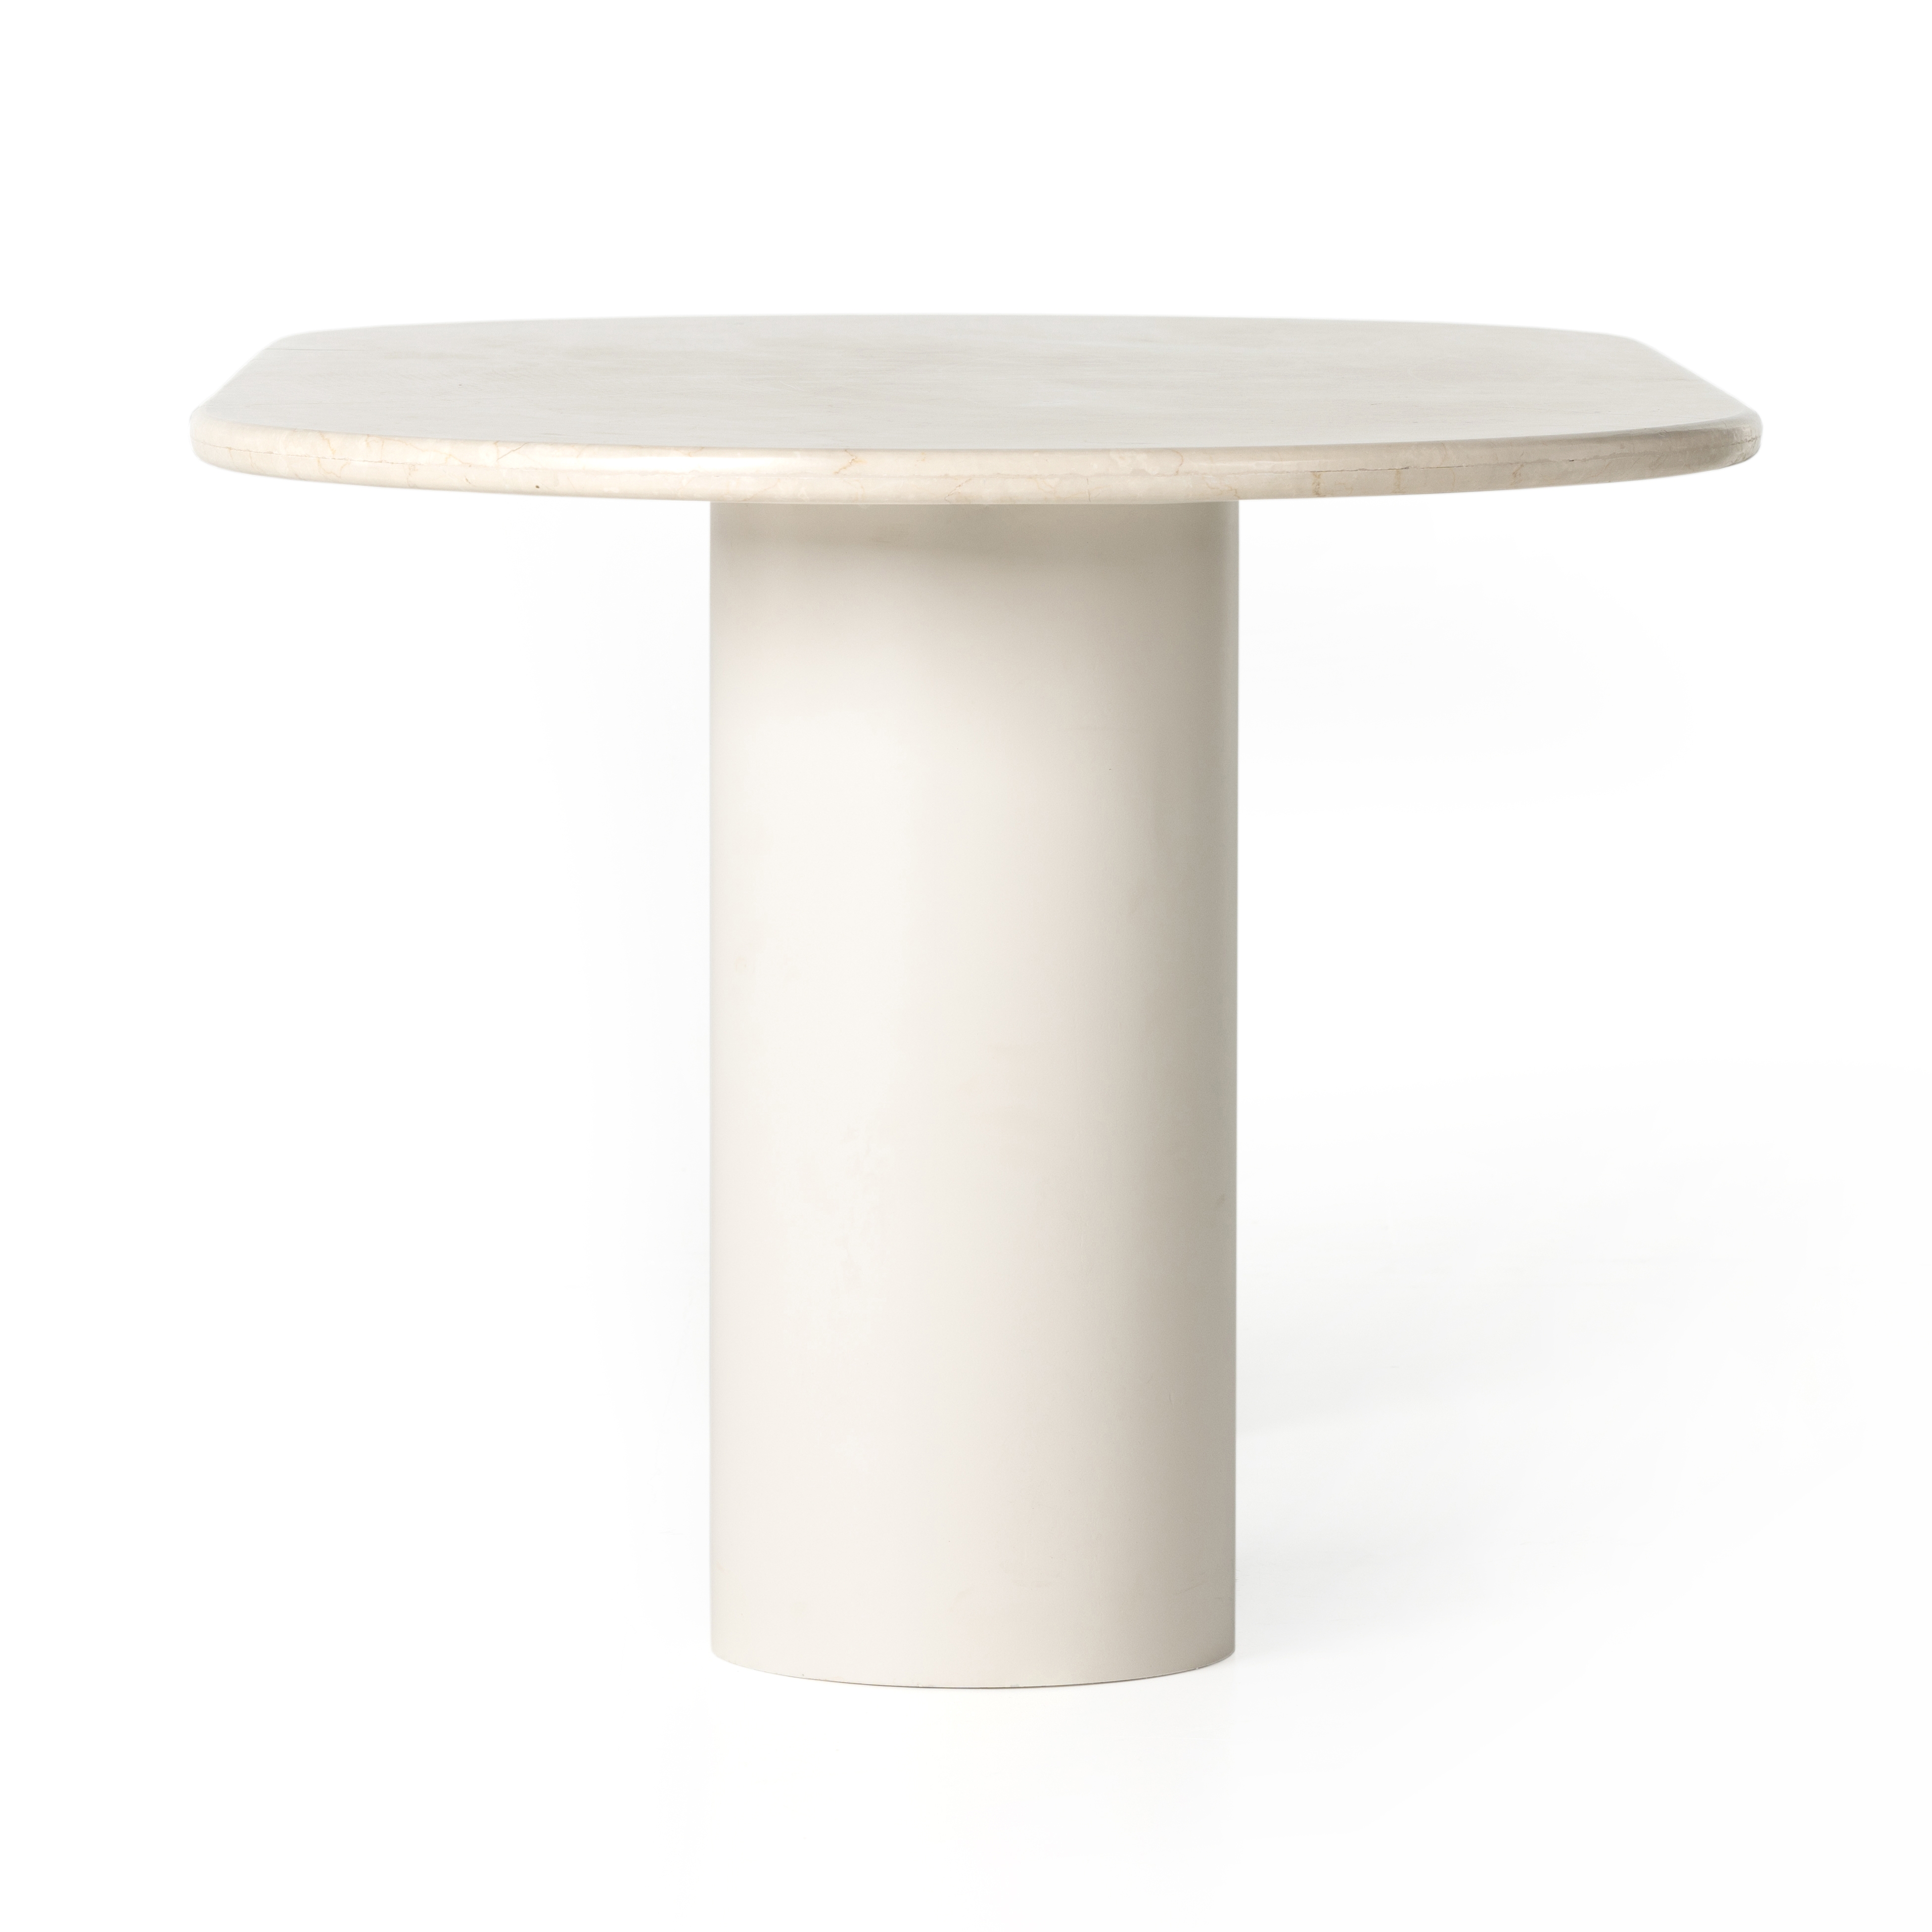 Belle Oval Dining Table-Cream Marble - Image 4